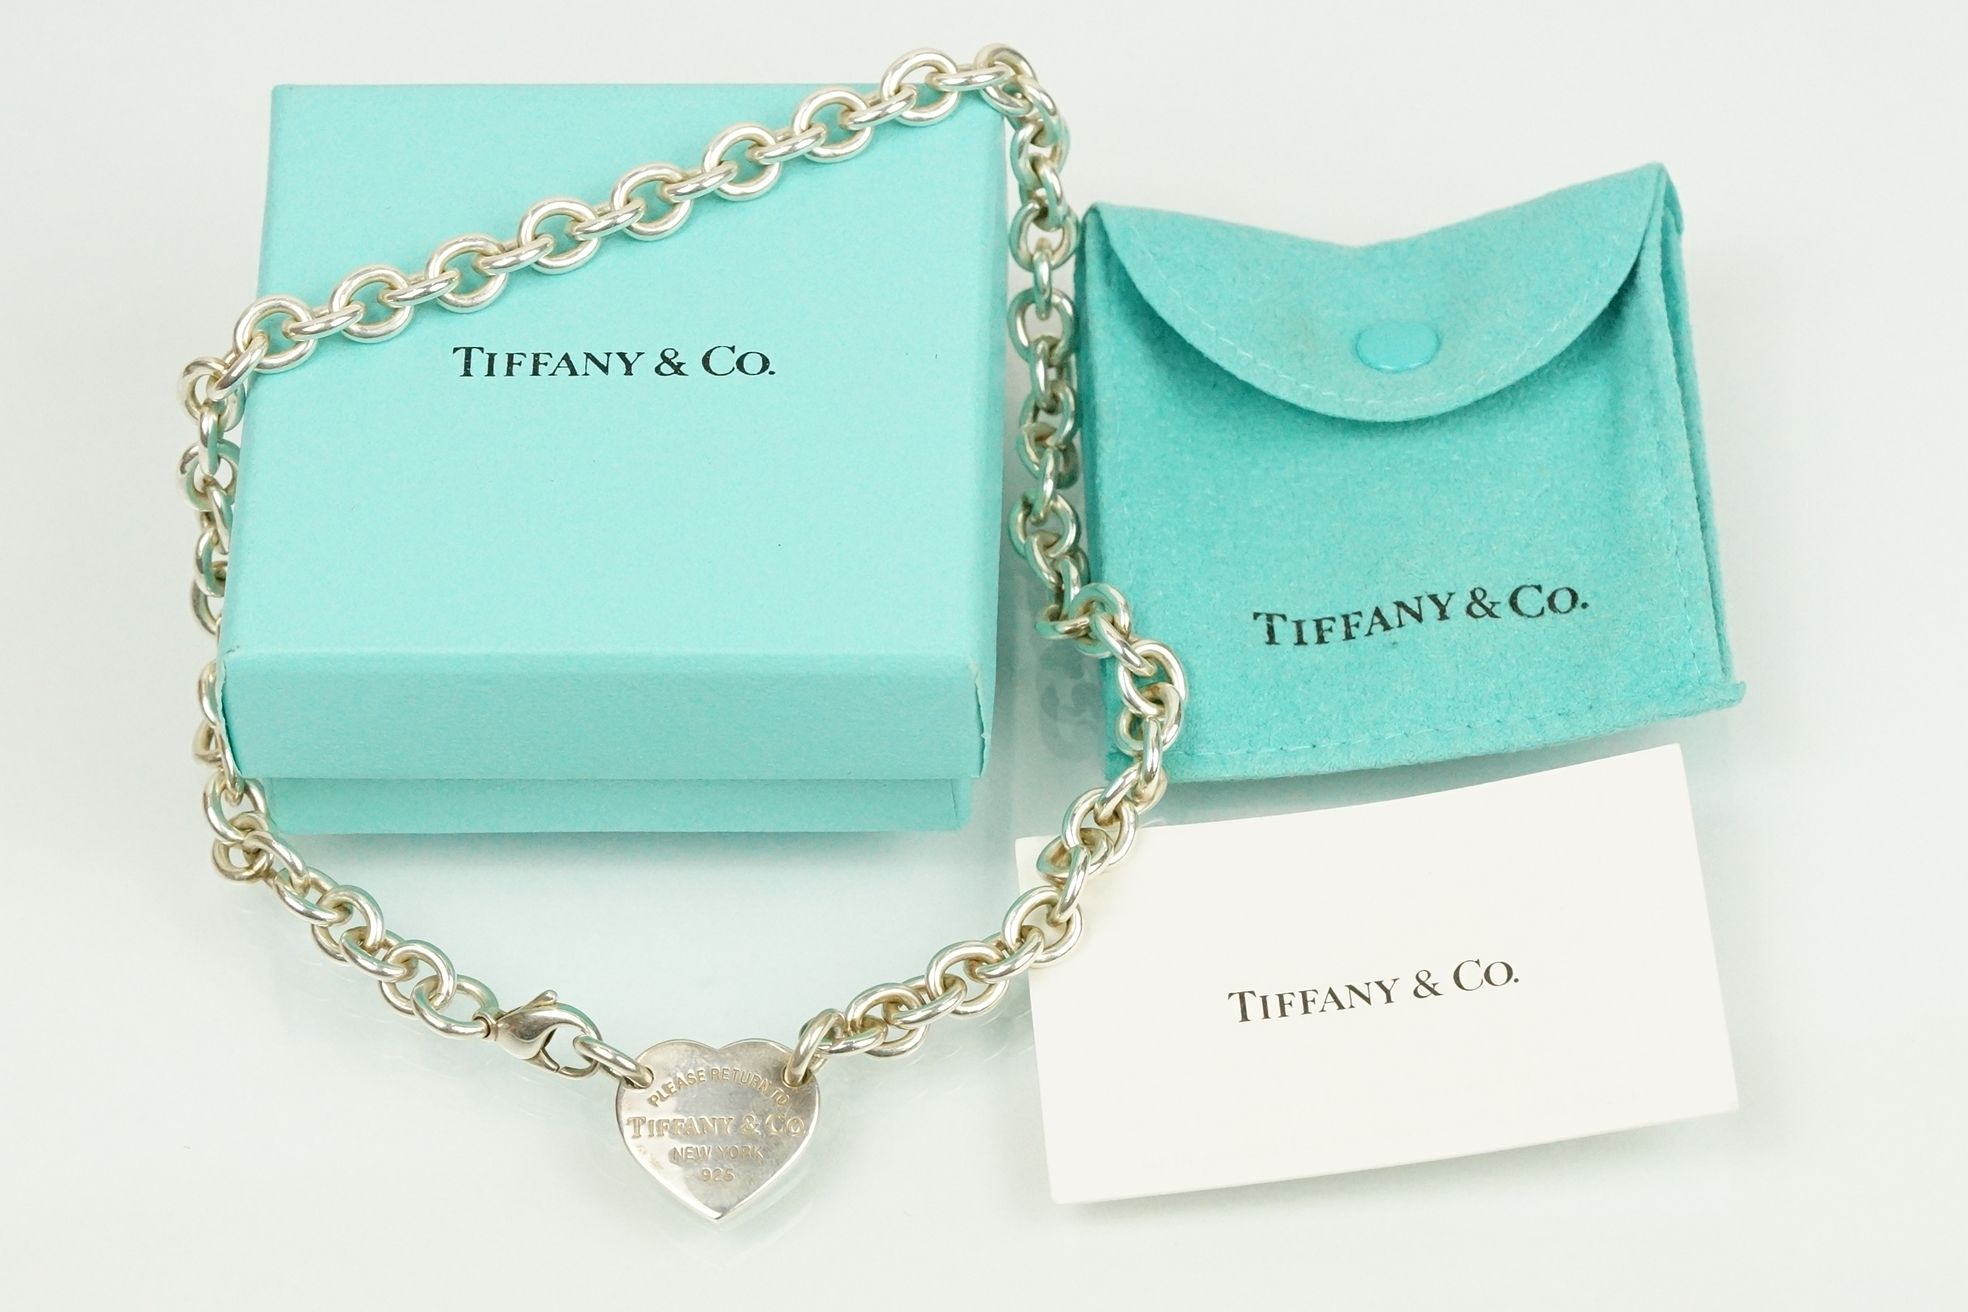 Tiffany & Co 'please return to ' pendant necklace having a heart shaped panel engraved Tiffany & Co.